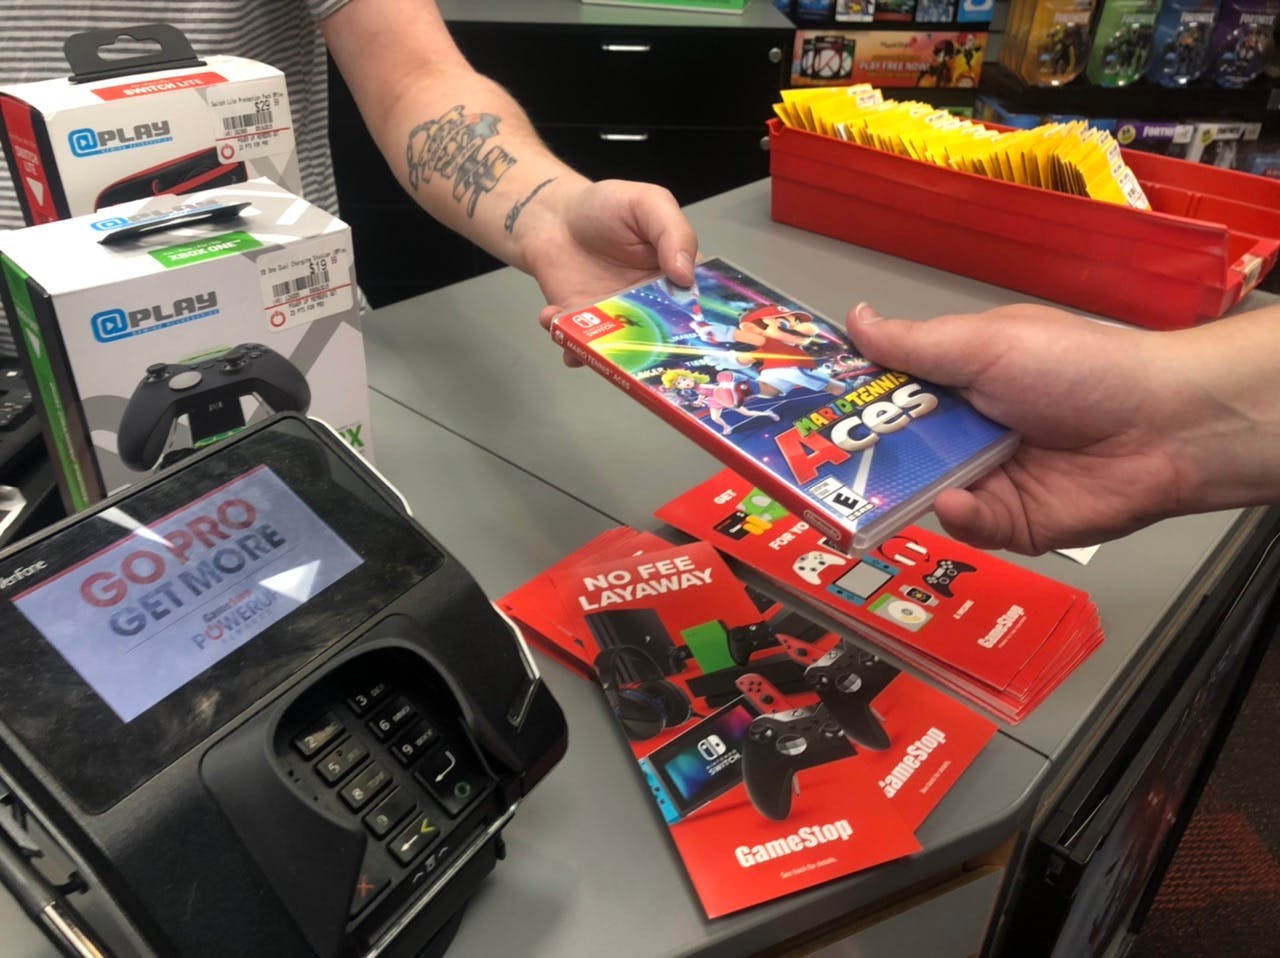 A man hands a video game to another man behind The counter at GameStop.